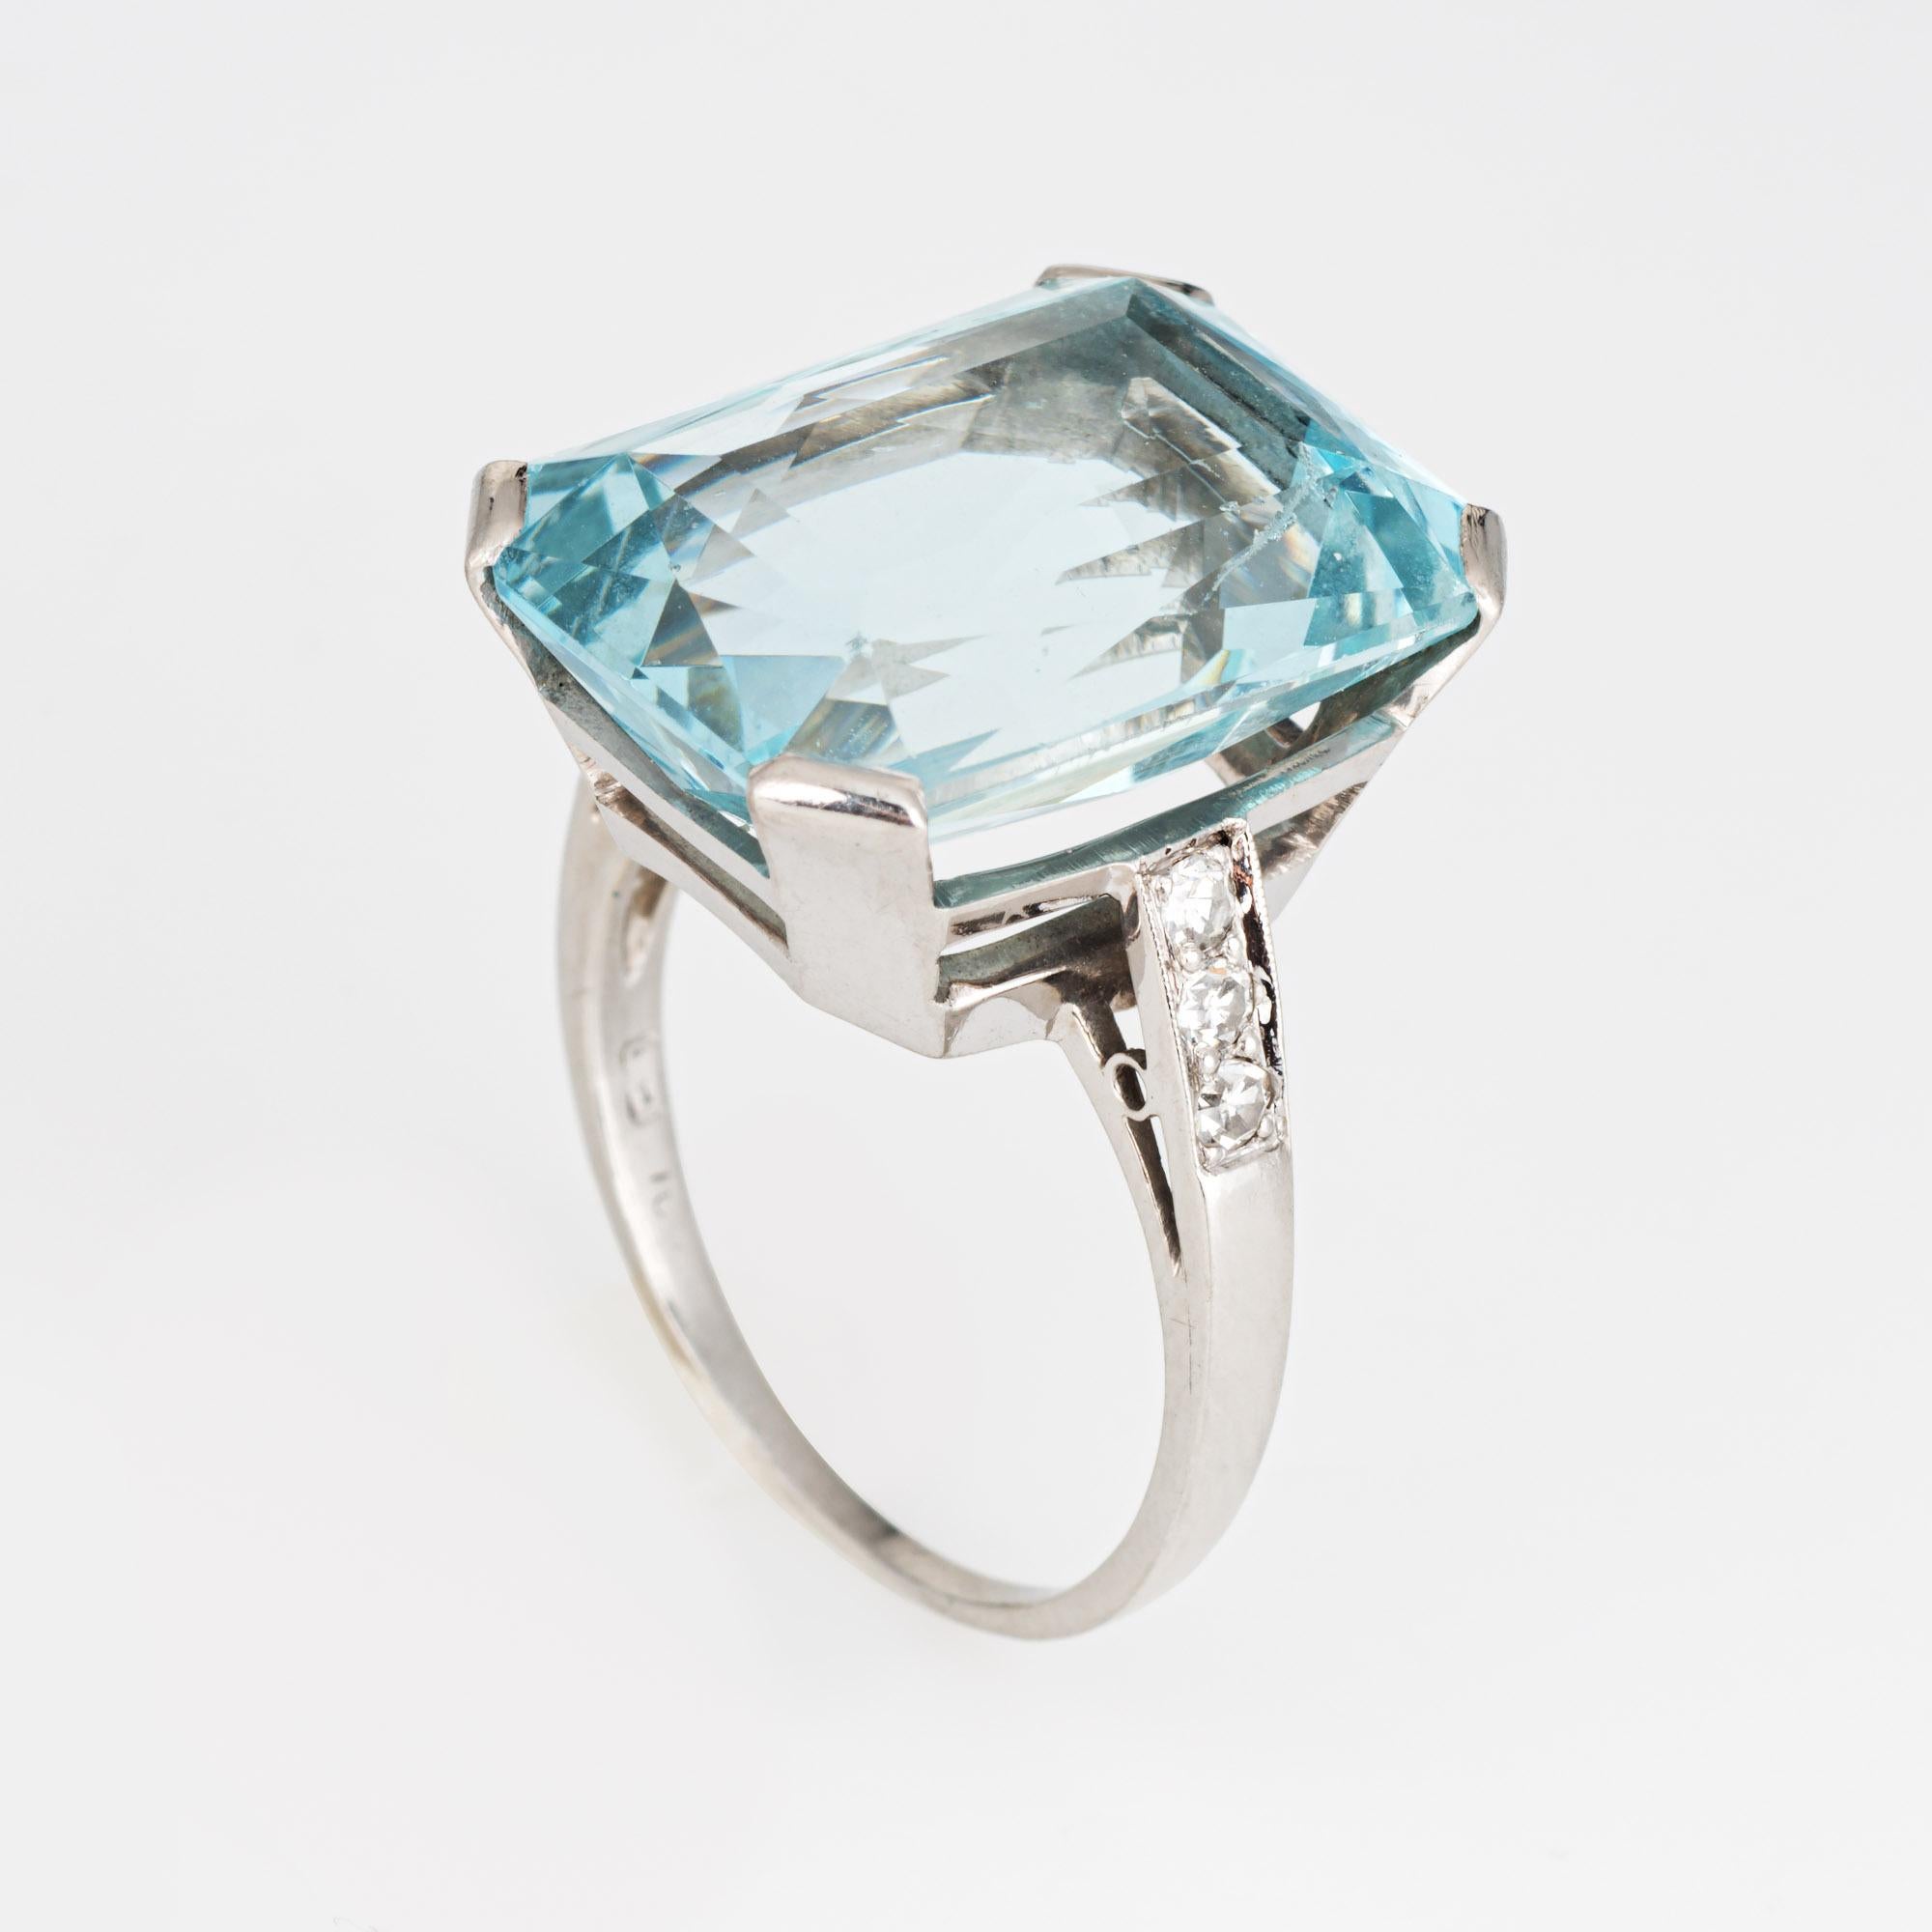 Stylish vintage aquamarine & diamond cocktail ring (circa 1920s to 1960s) crafted in 900 platinum. 

Faceted emerald cut aquamarine measures 17.5mm x 13mm (estimated at 13.50 carats), accented with 6 single cut diamonds totaling an estimated 0.03